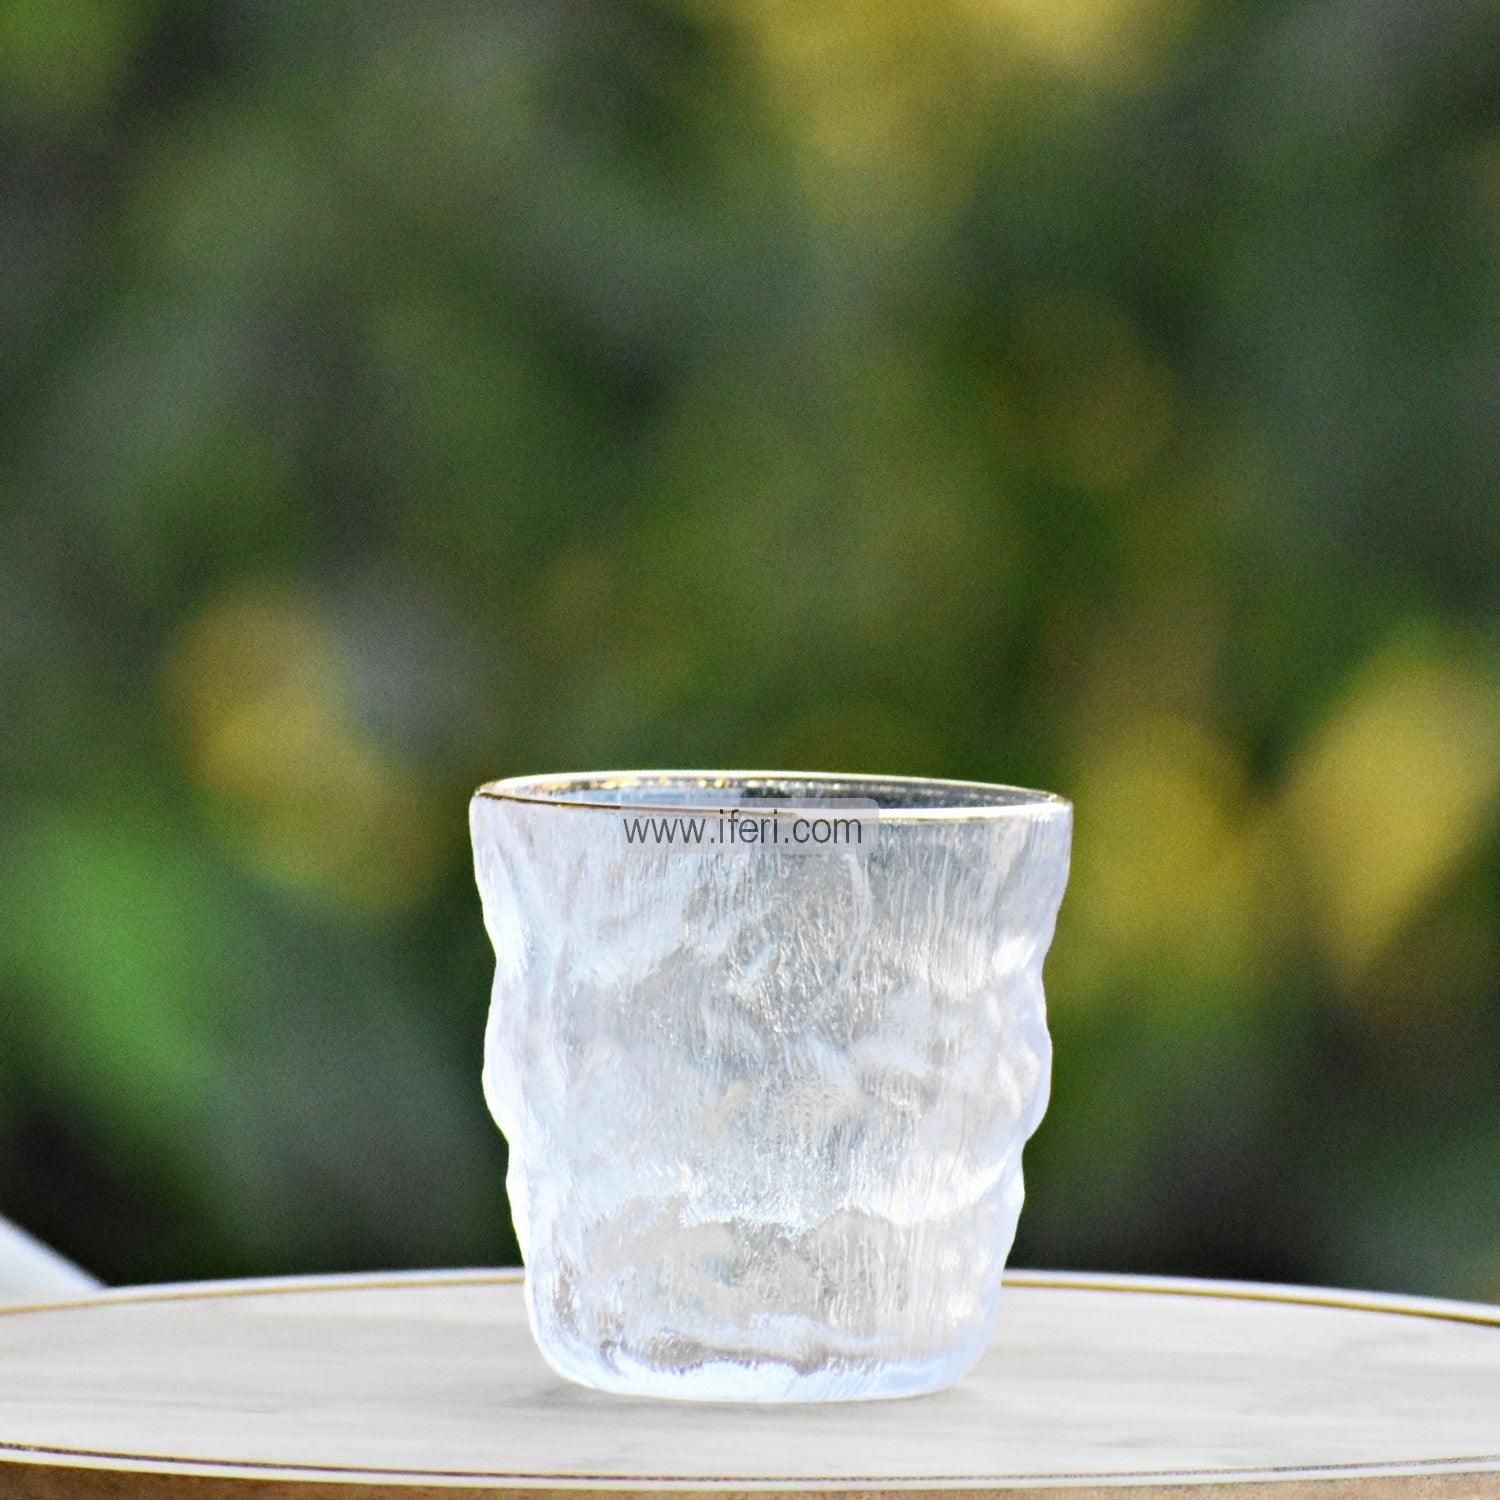 6 pcs Frosted Ice Dew Pattern Water Juice Glass EB0925 Price in Bangladesh - iferi.com